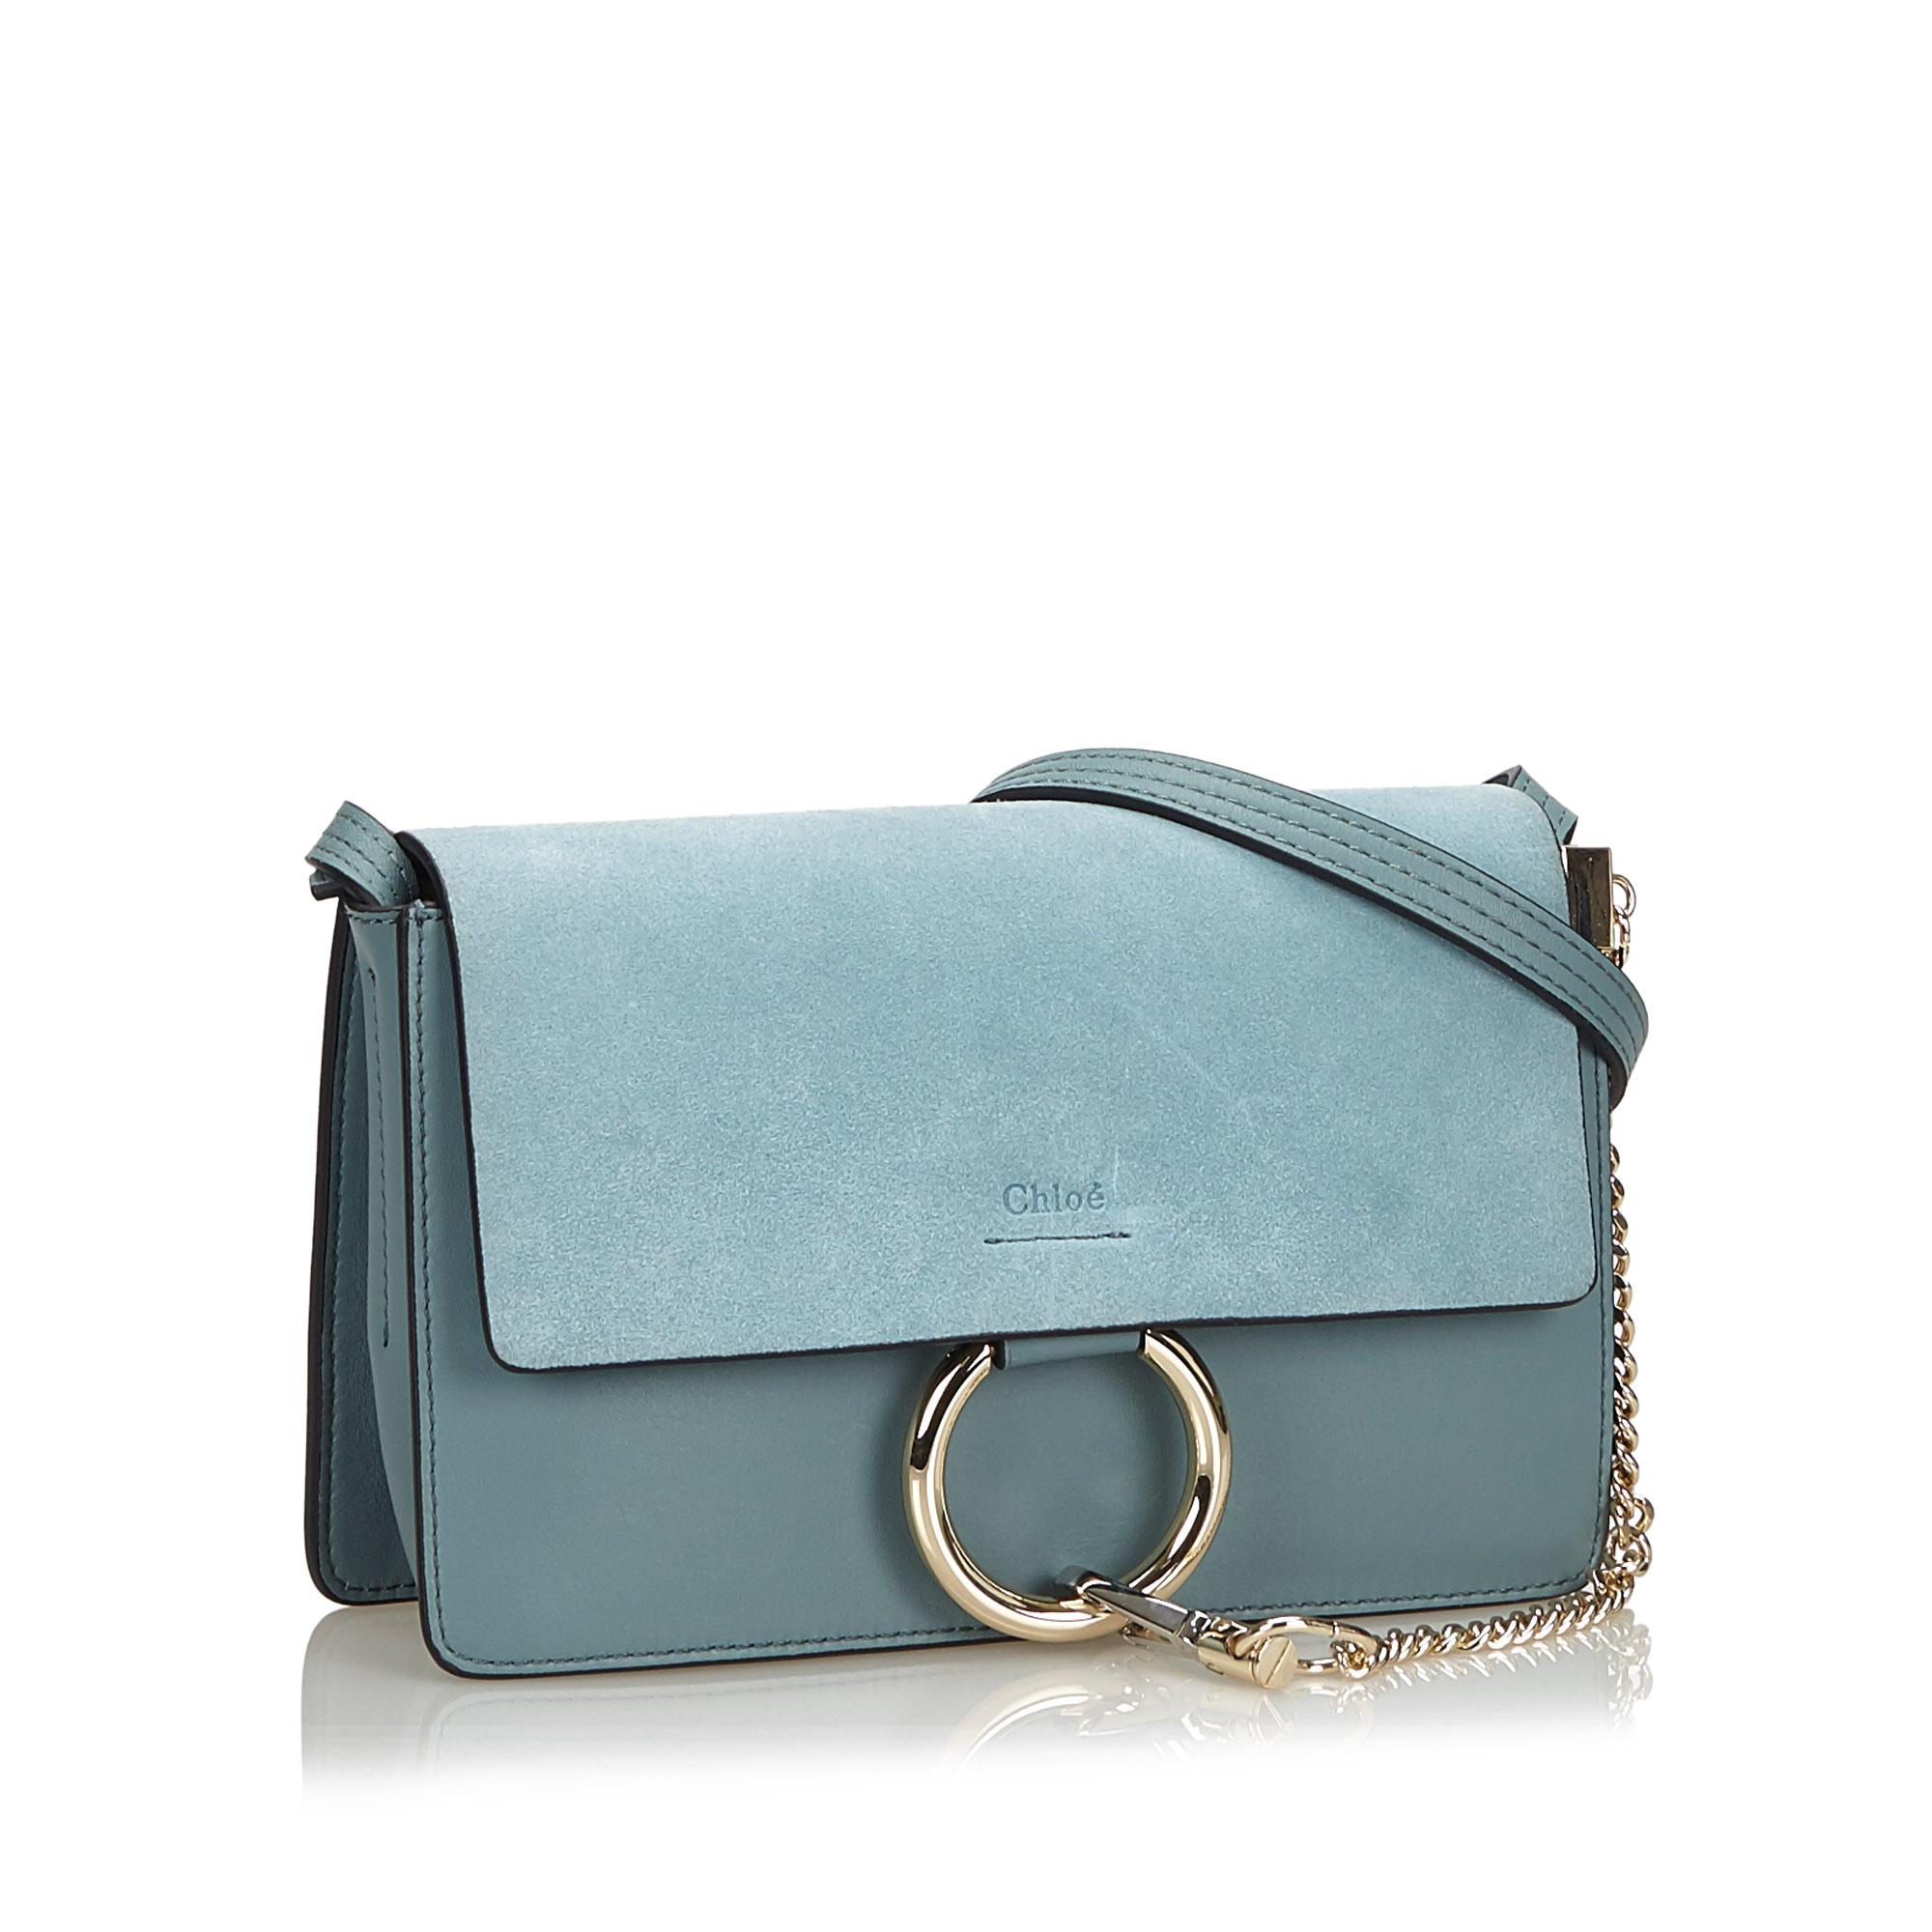 This Faye features a leather body, flat leather strap, suede top flap with a hook closure, and an interior zip pocket. It carries as AB condition rating.

Inclusions: 
This item does not come with inclusions.

Dimensions:
Length: 18.00 cm
Width: